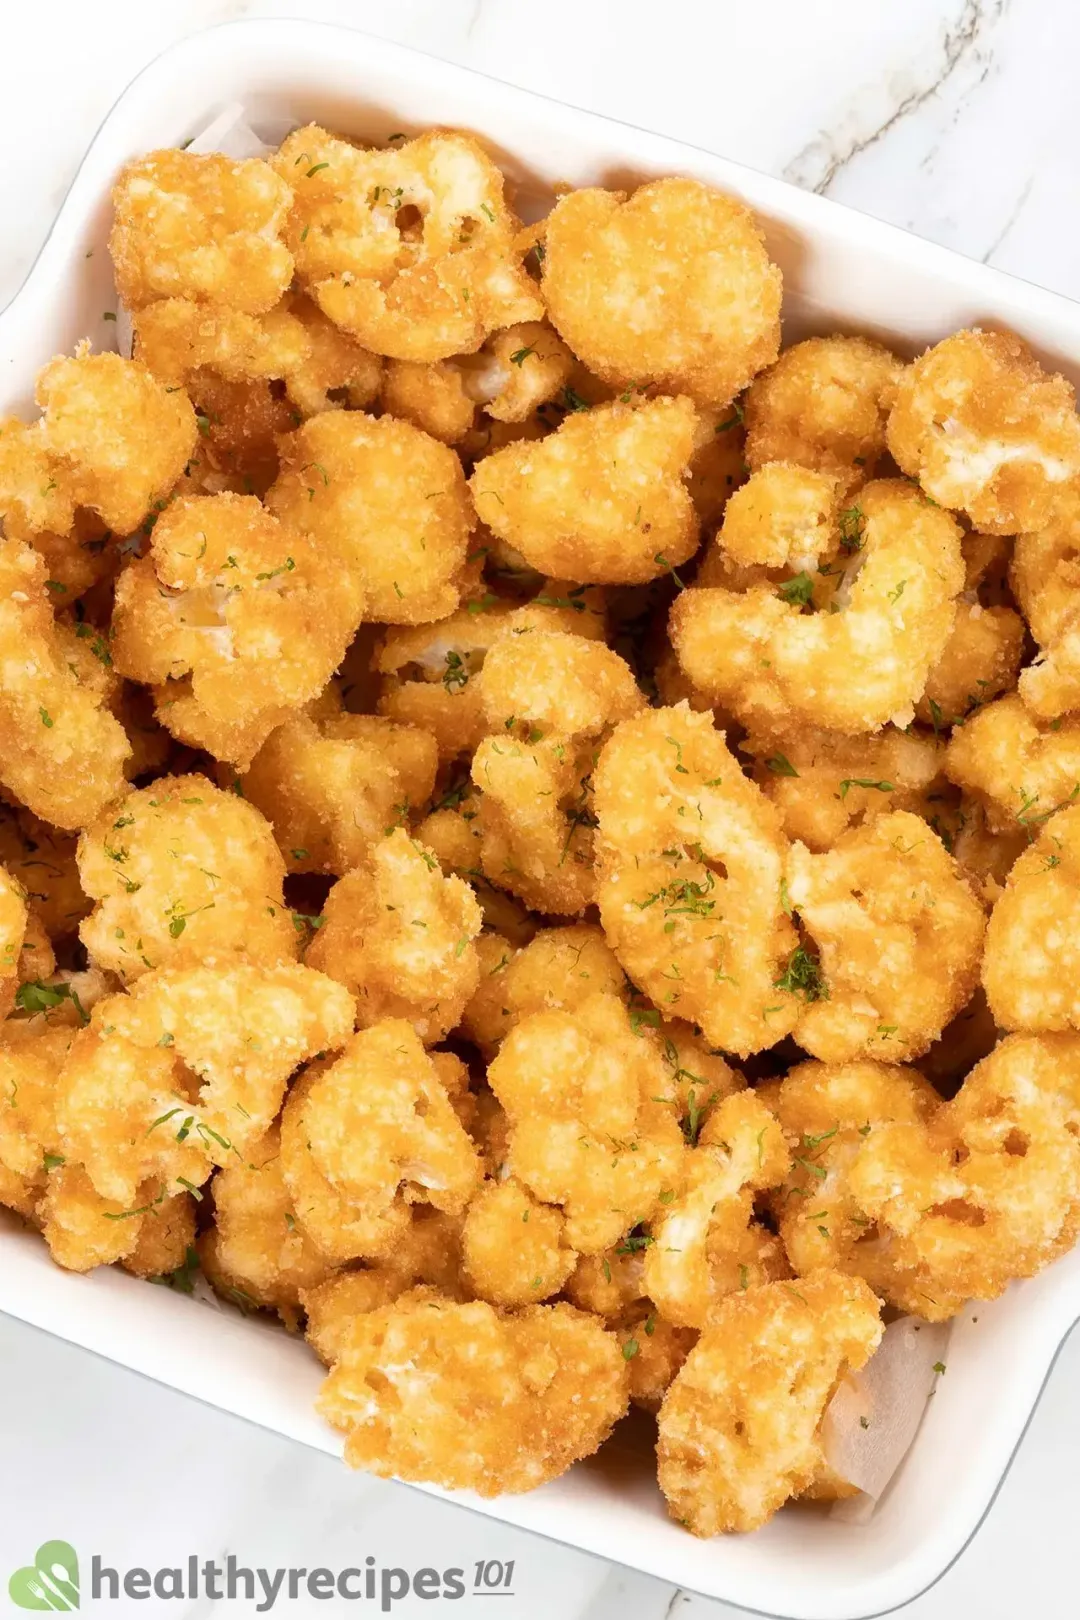 How to Store And Reheat the Leftovers cauliflower nuggets